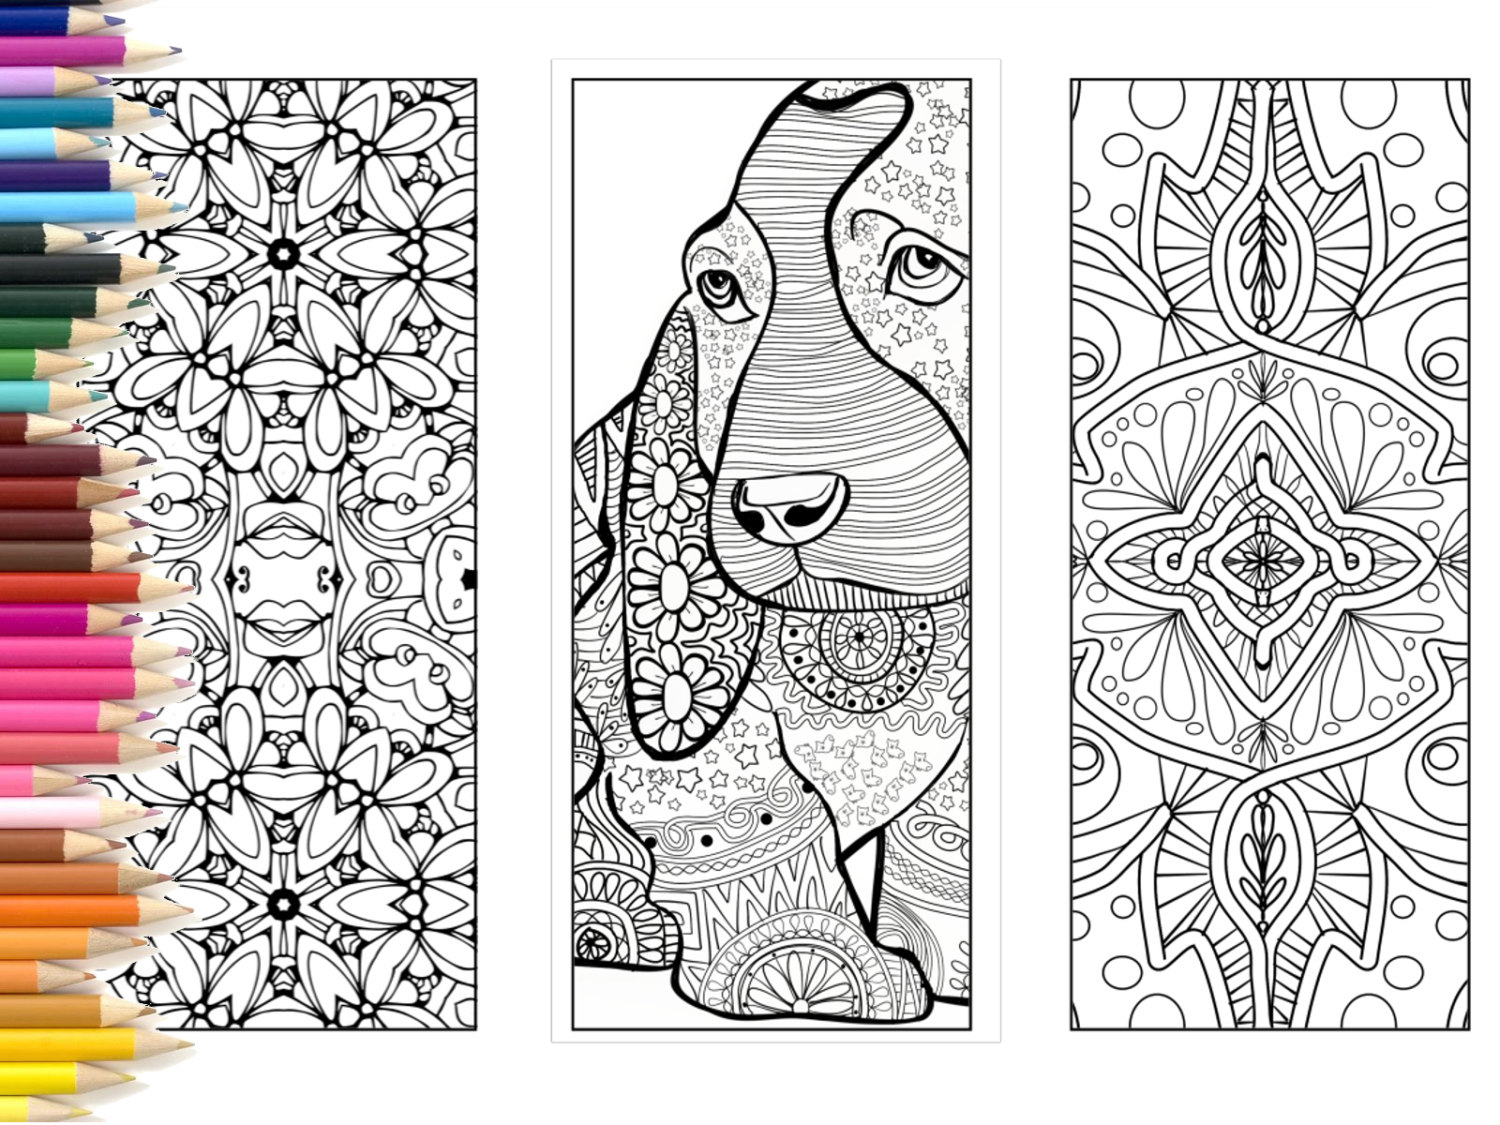 Coloring Pages ~ Coloring Pages Printable Bookmarks For Kids - Free Printable Bookmarks To Color